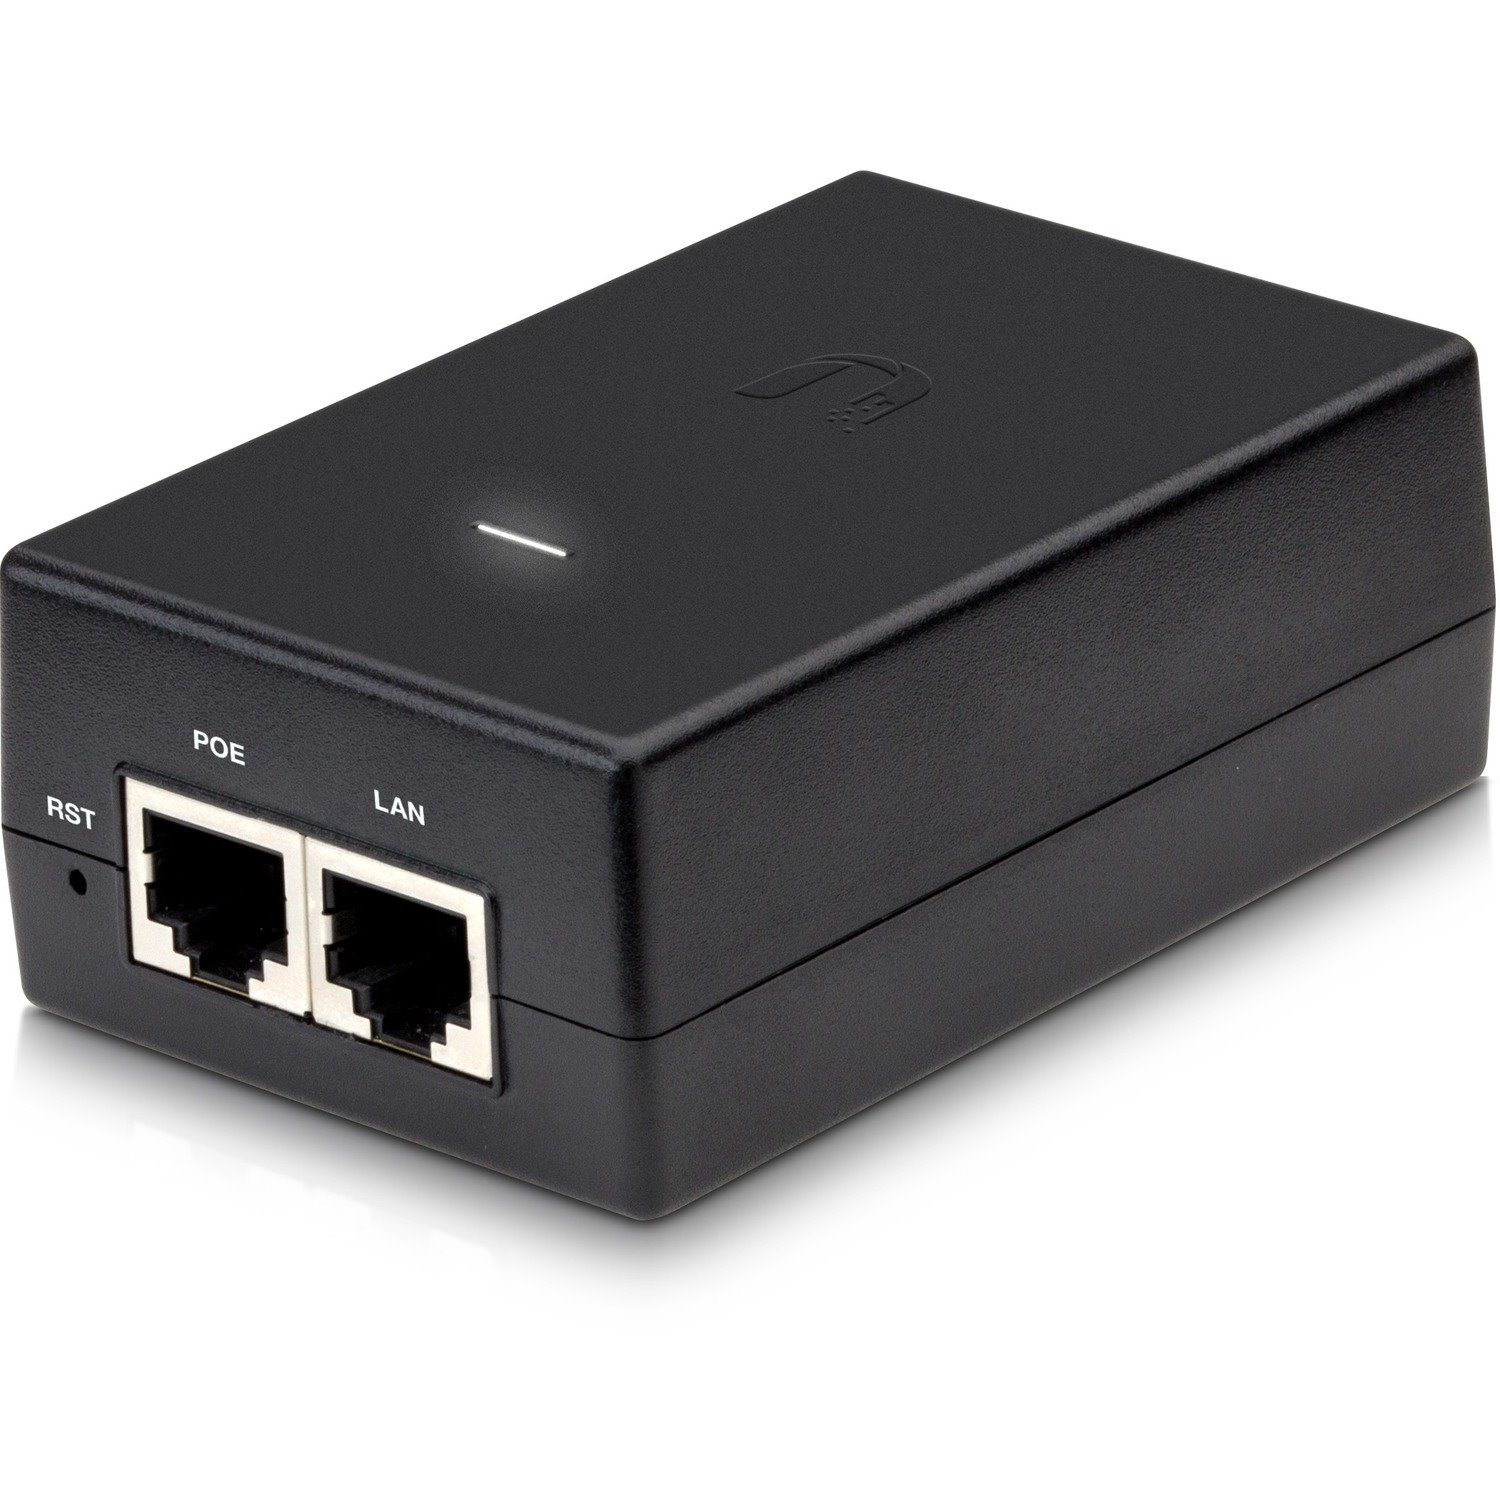 Ubiquiti Poe Adap Provide A Of Features